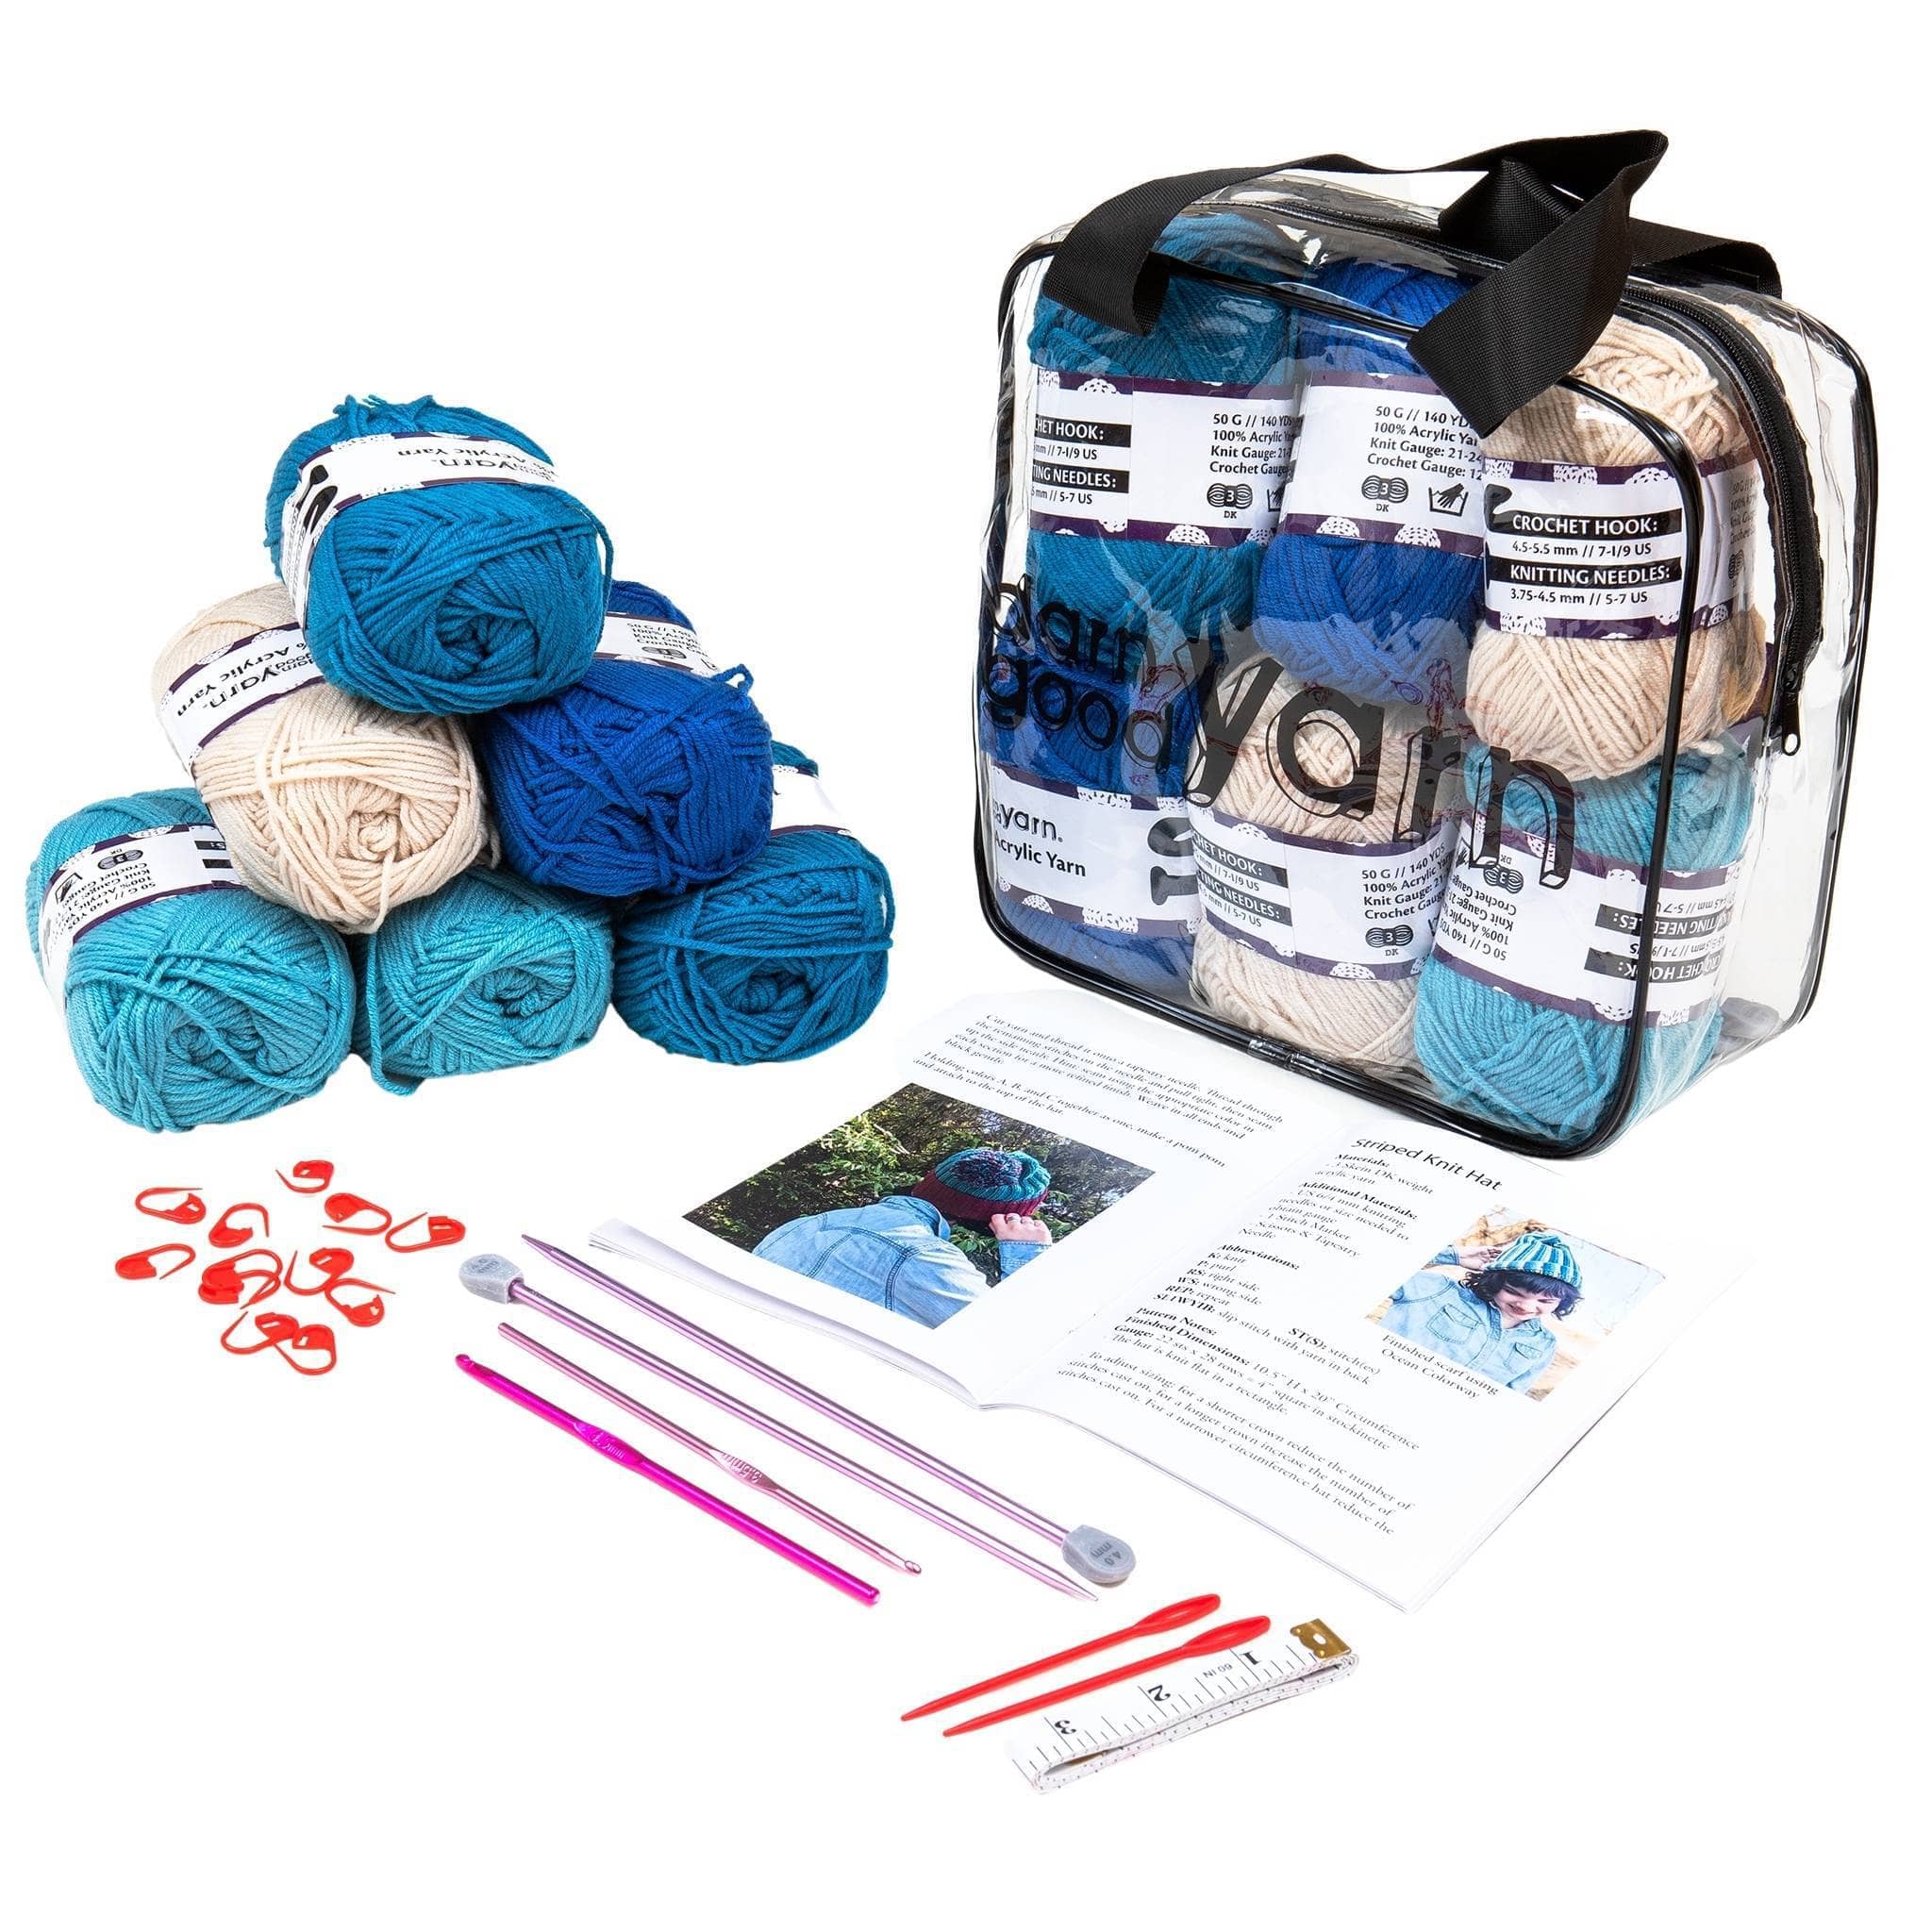 All About Knitting Acrylic Yarn (everything you need to know